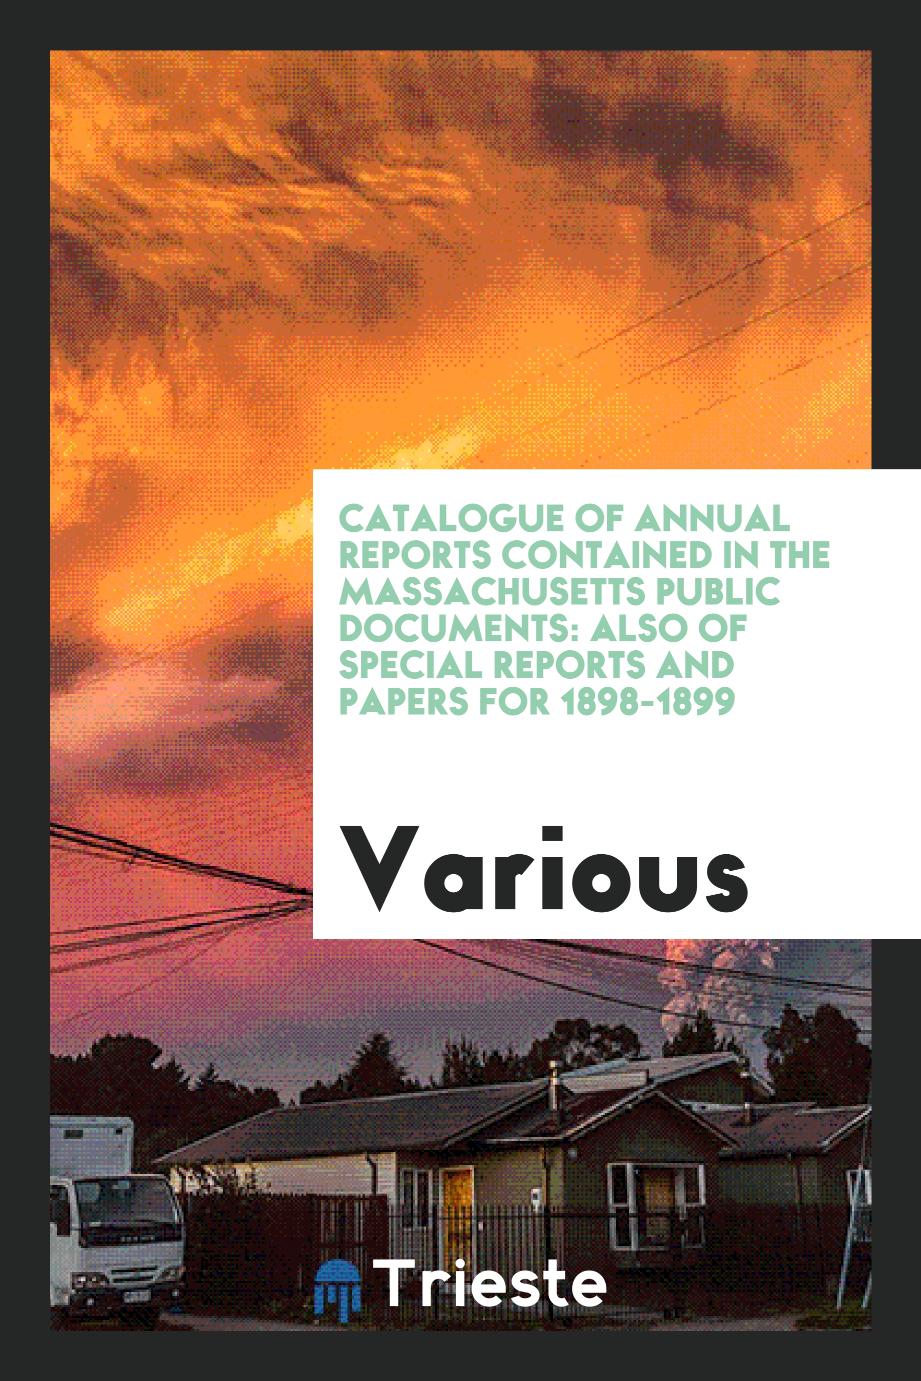 Catalogue of Annual Reports Contained in the Massachusetts Public Documents: Also of Special Reports and Papers for 1898-1899